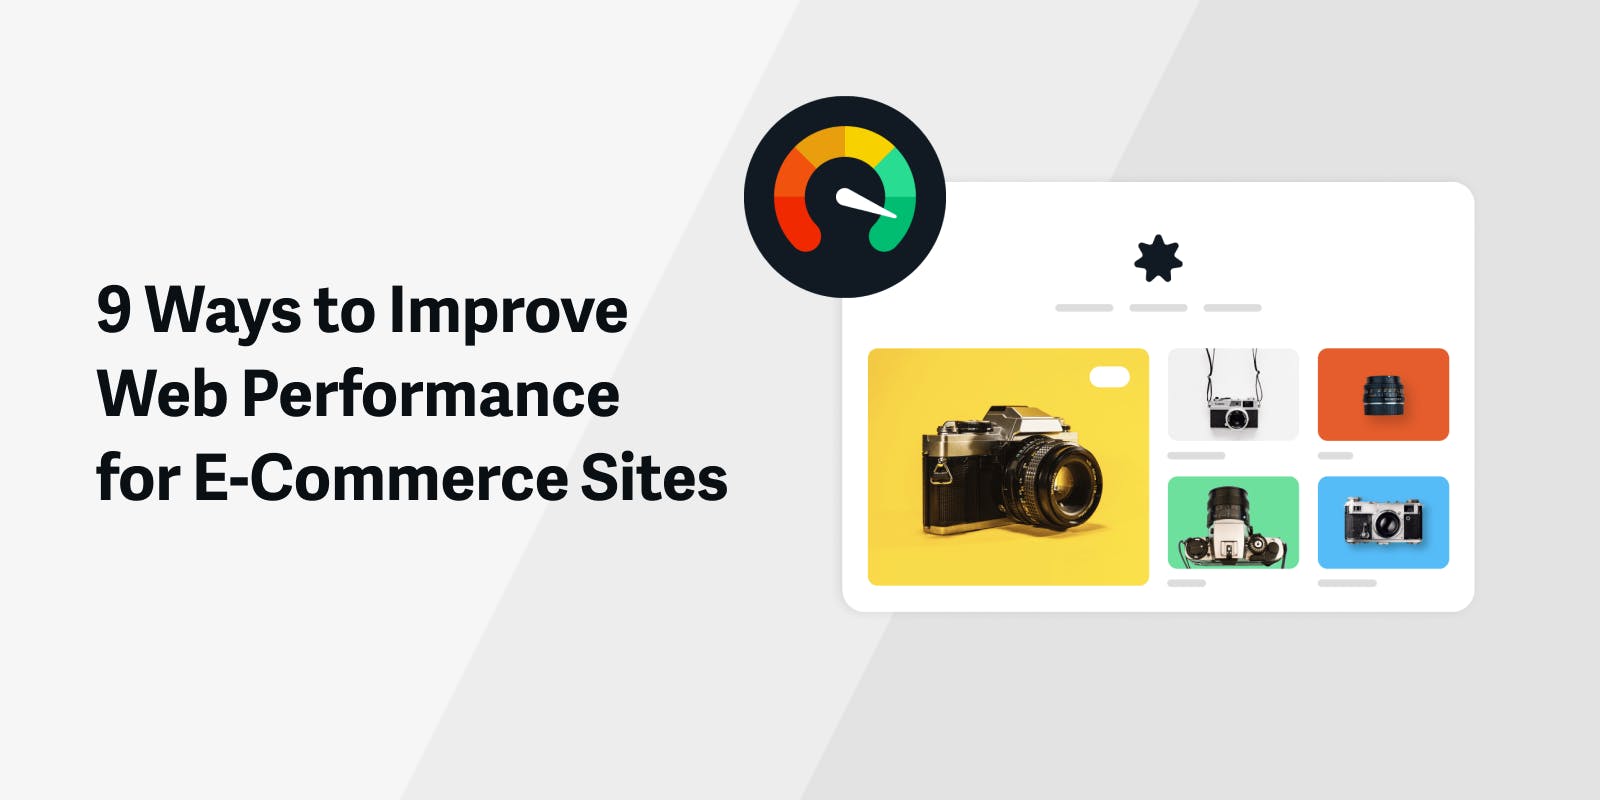 Web performance and SEO are crucial for e-commerce success. Doing it right can reduce your infrastructure cost and save time. Image compression and video optimization are the simplest ways to get there.